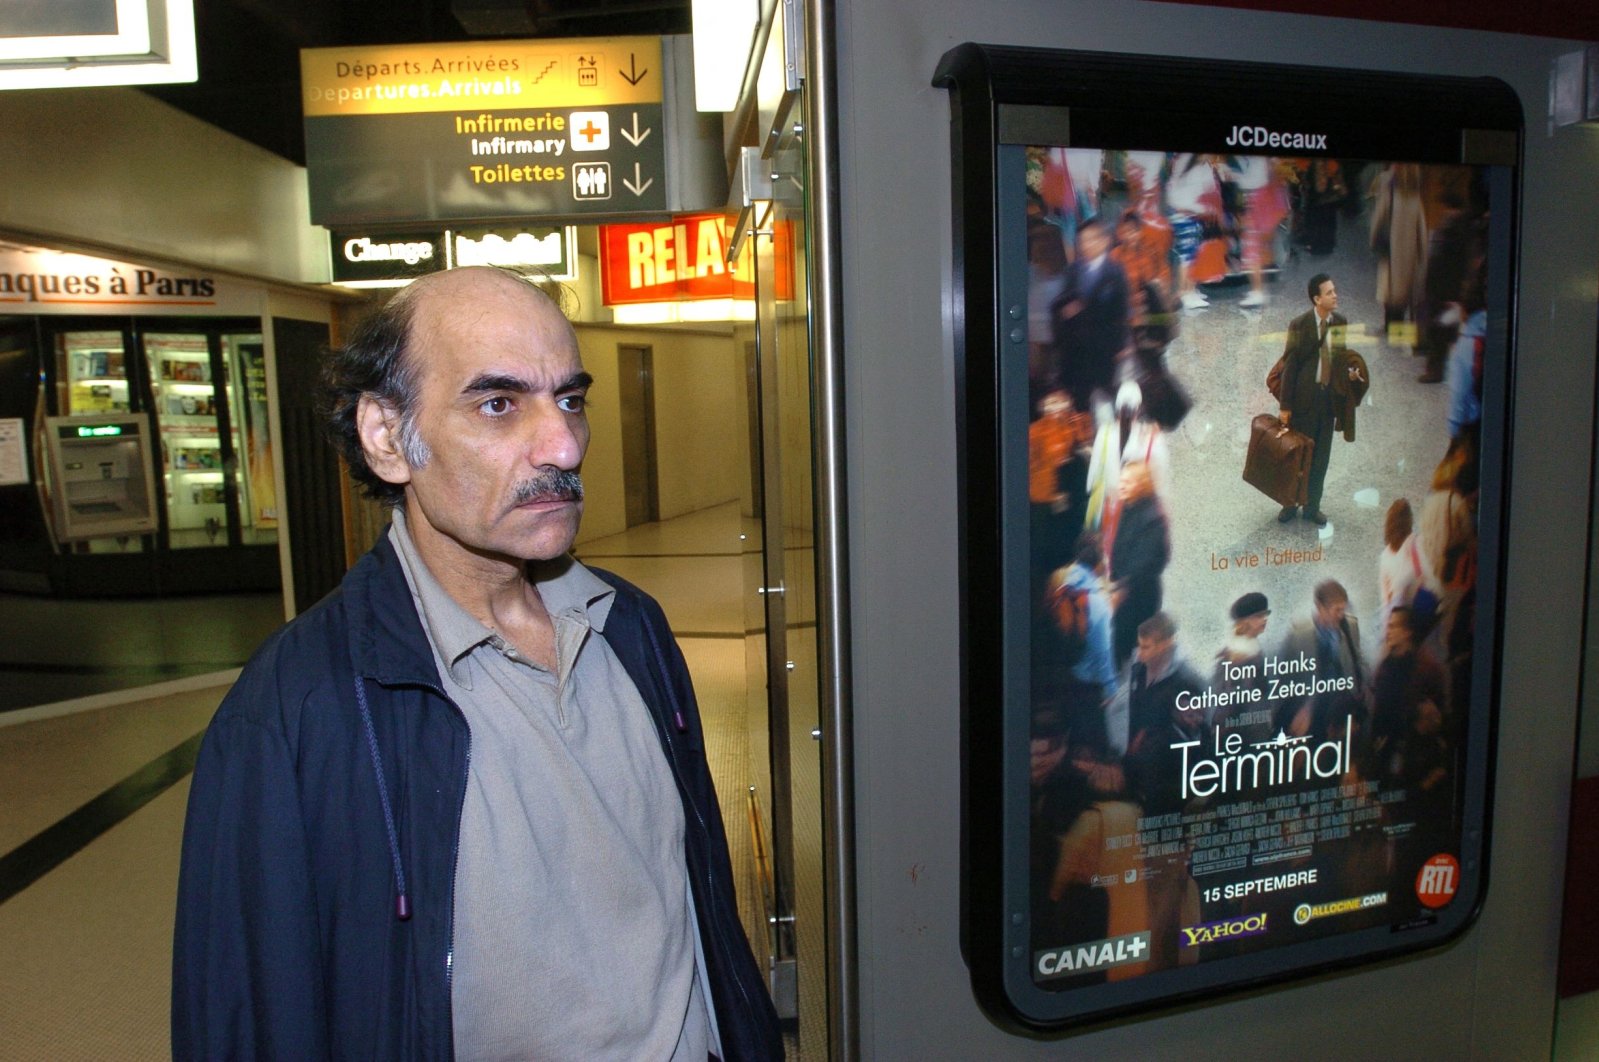 Mehran Karimi Nasseri passes by the poster of the movie inspired by his life, in Terminal 1 of Paris Charles De Gaulle airport, Paris, France, Aug. 12, 2004. (AFP Photo)